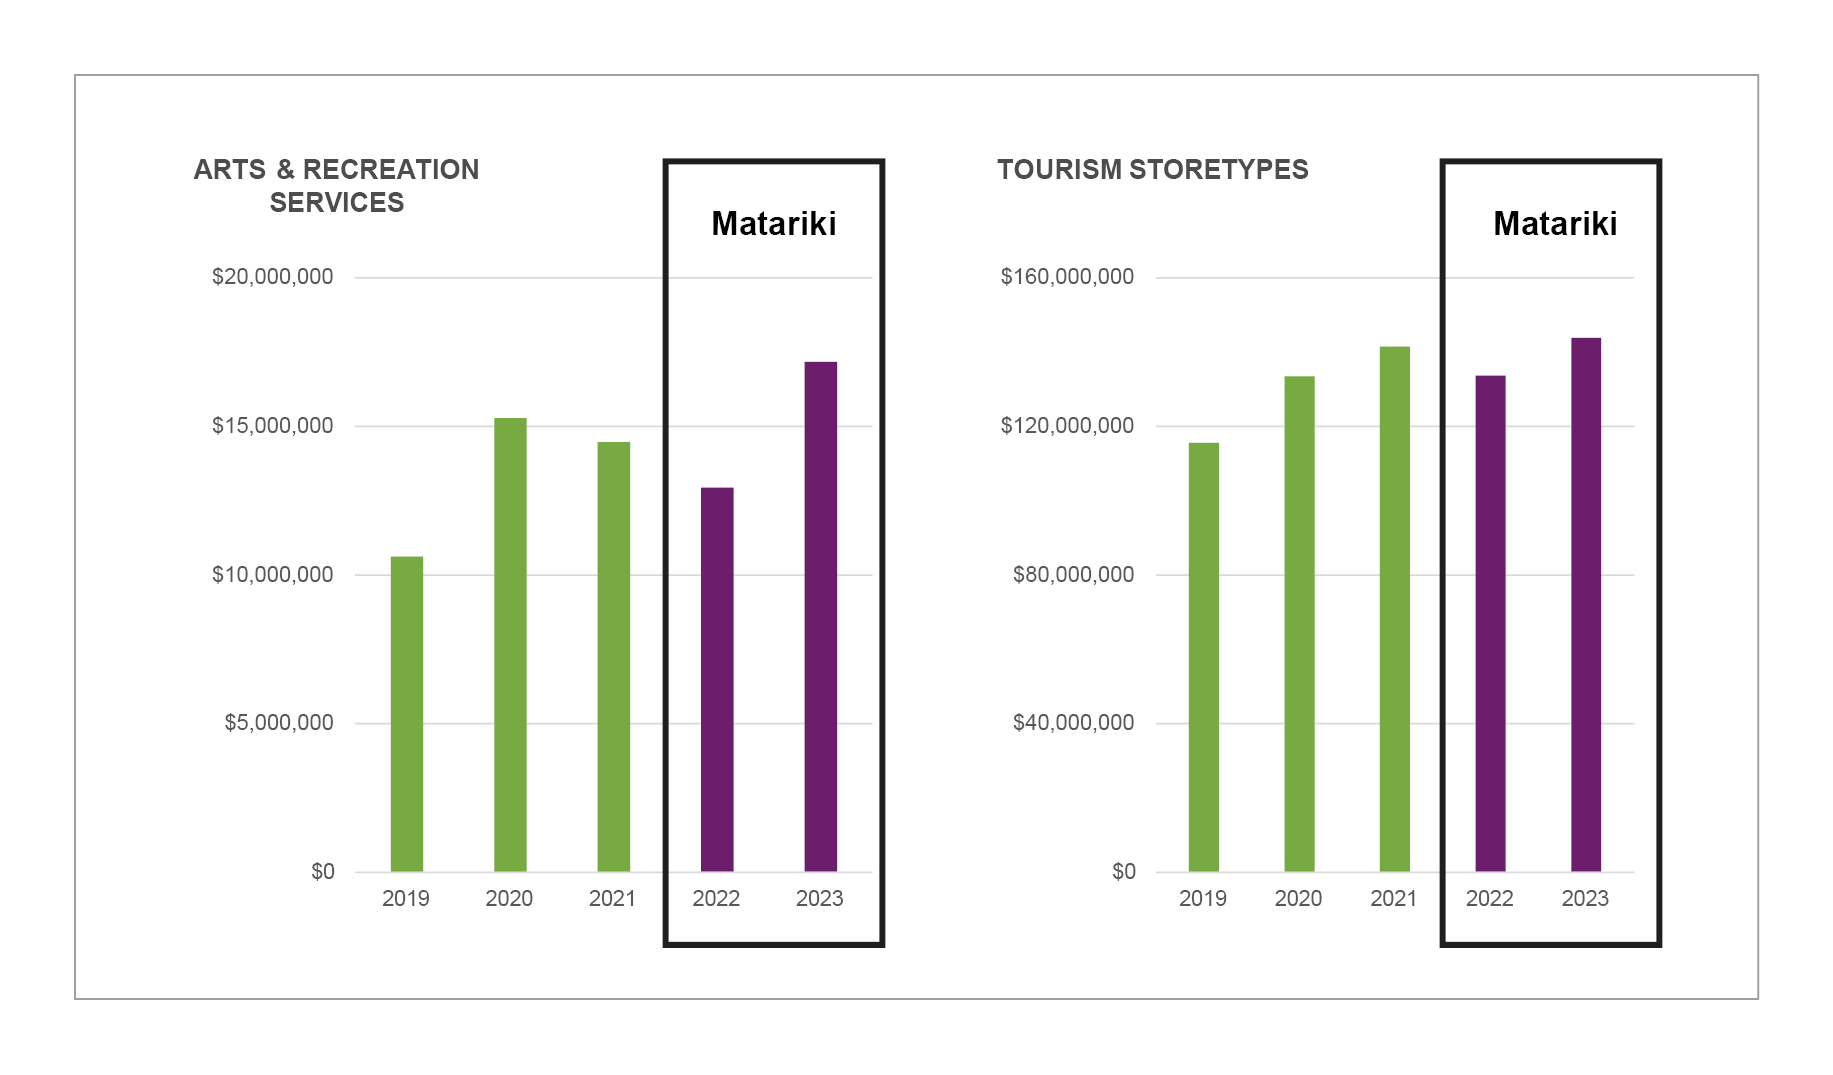 Bar graph showing the consumer spend over Matariki in the arts and recreation sector and the tourism sector, there is a box around the  Matariki bars.